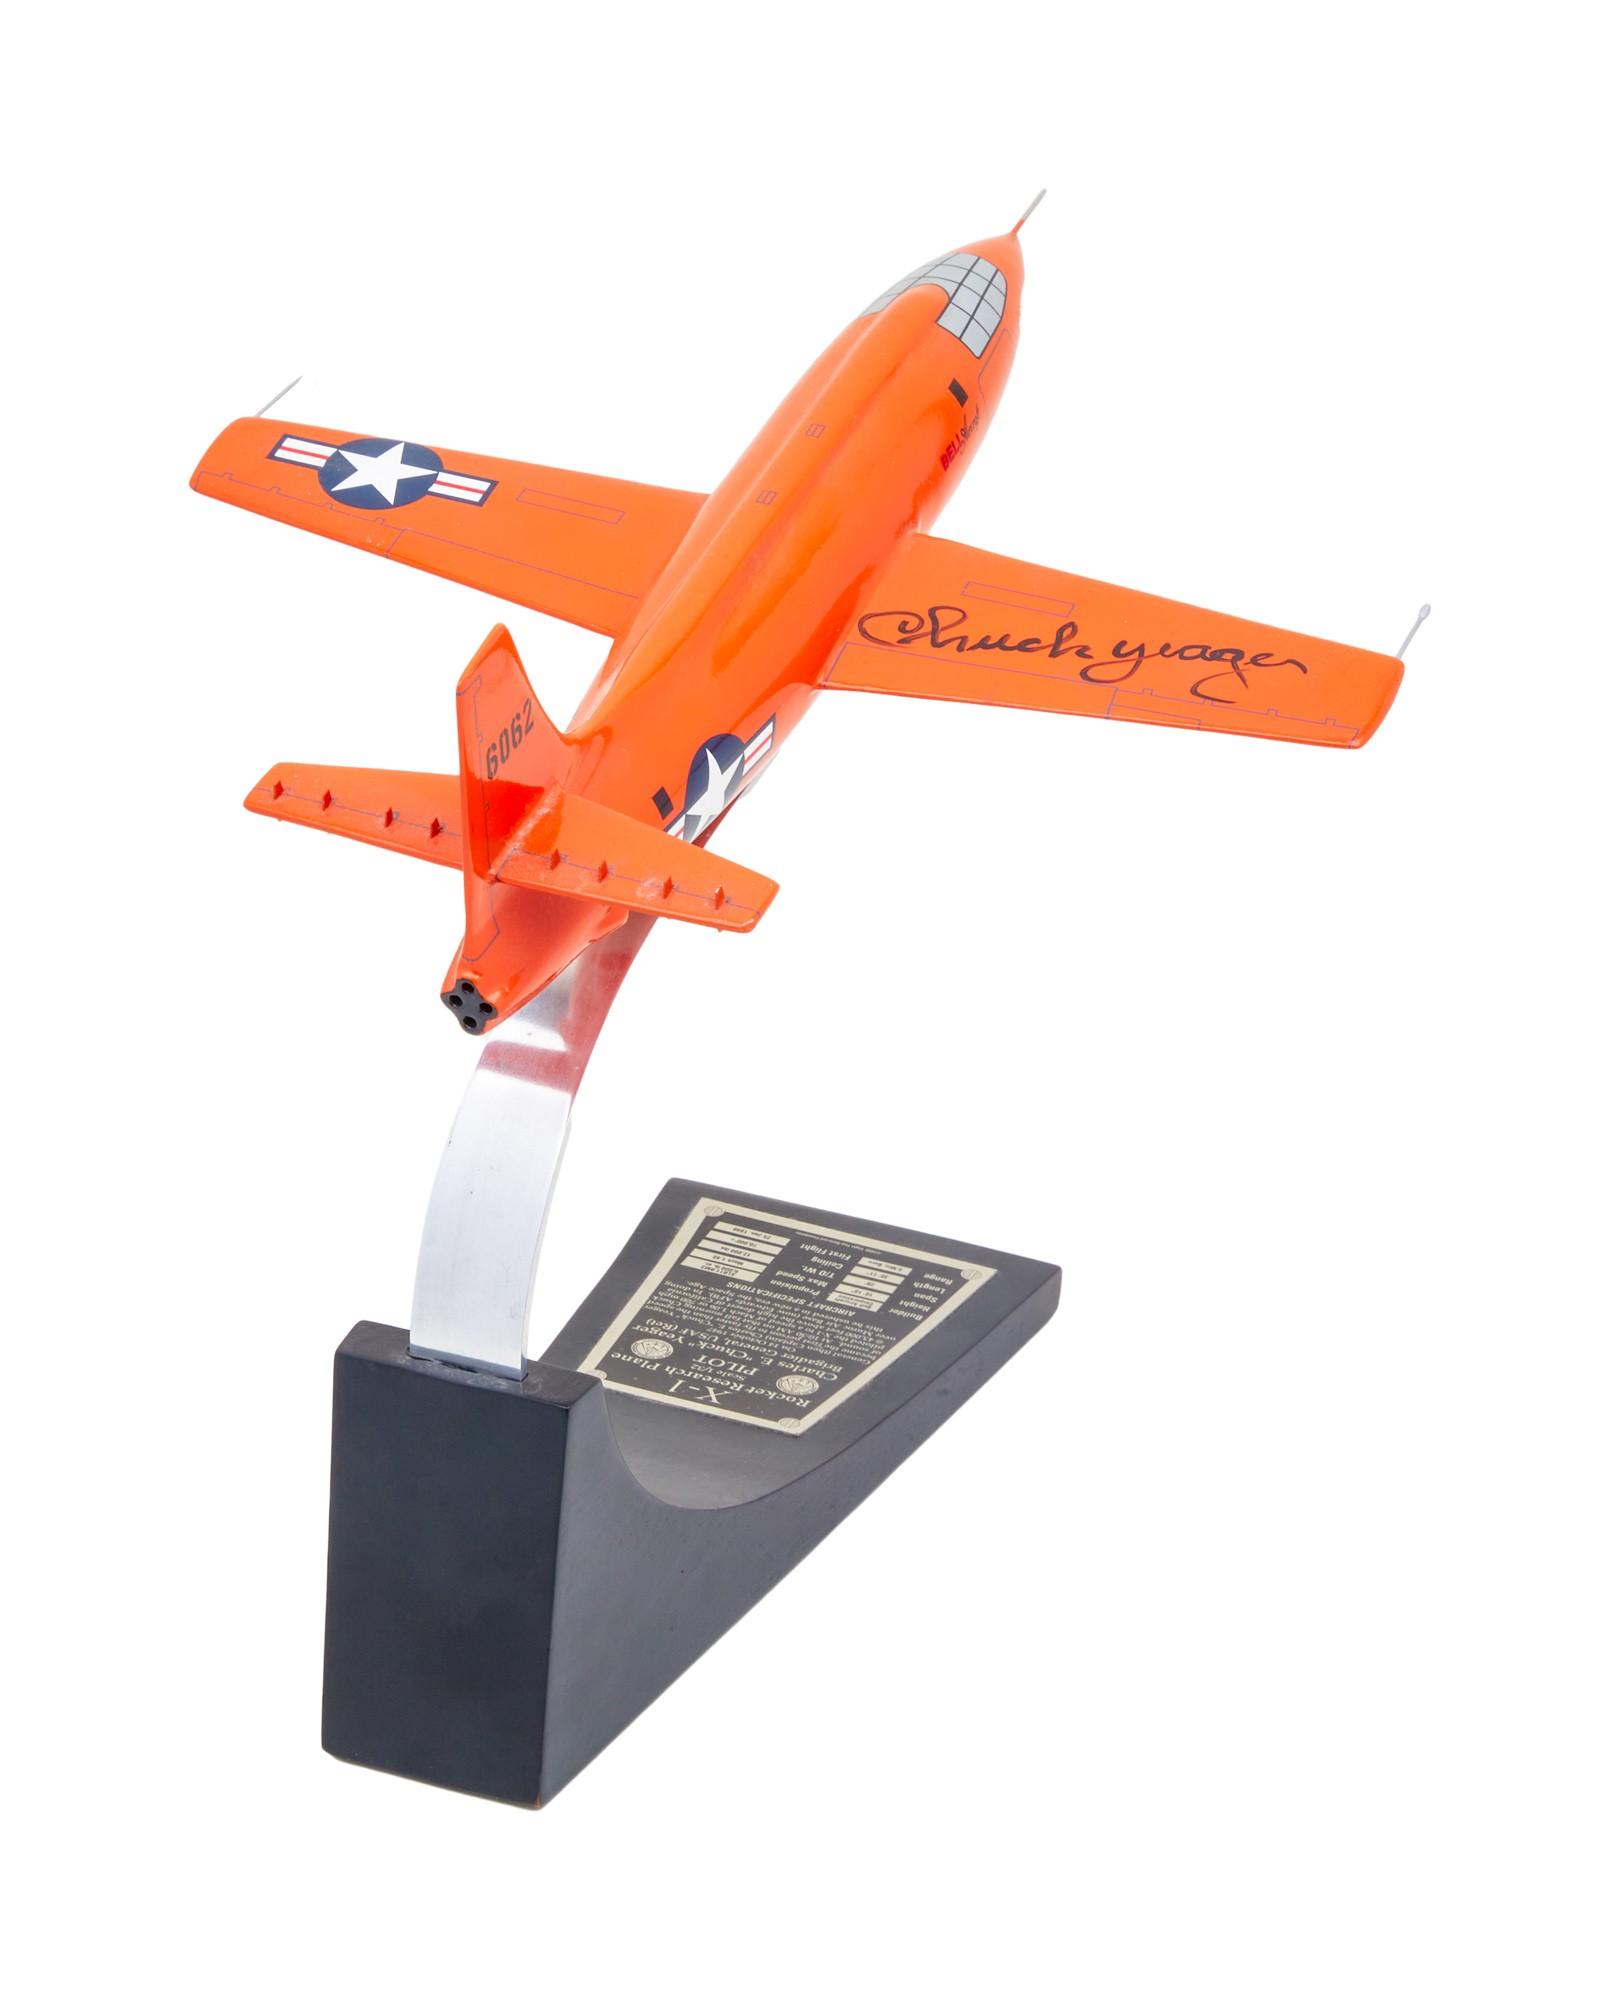 U.S. Air Force | Chuck Yeager Signed Bell X-1 Model Rocket Research Plane